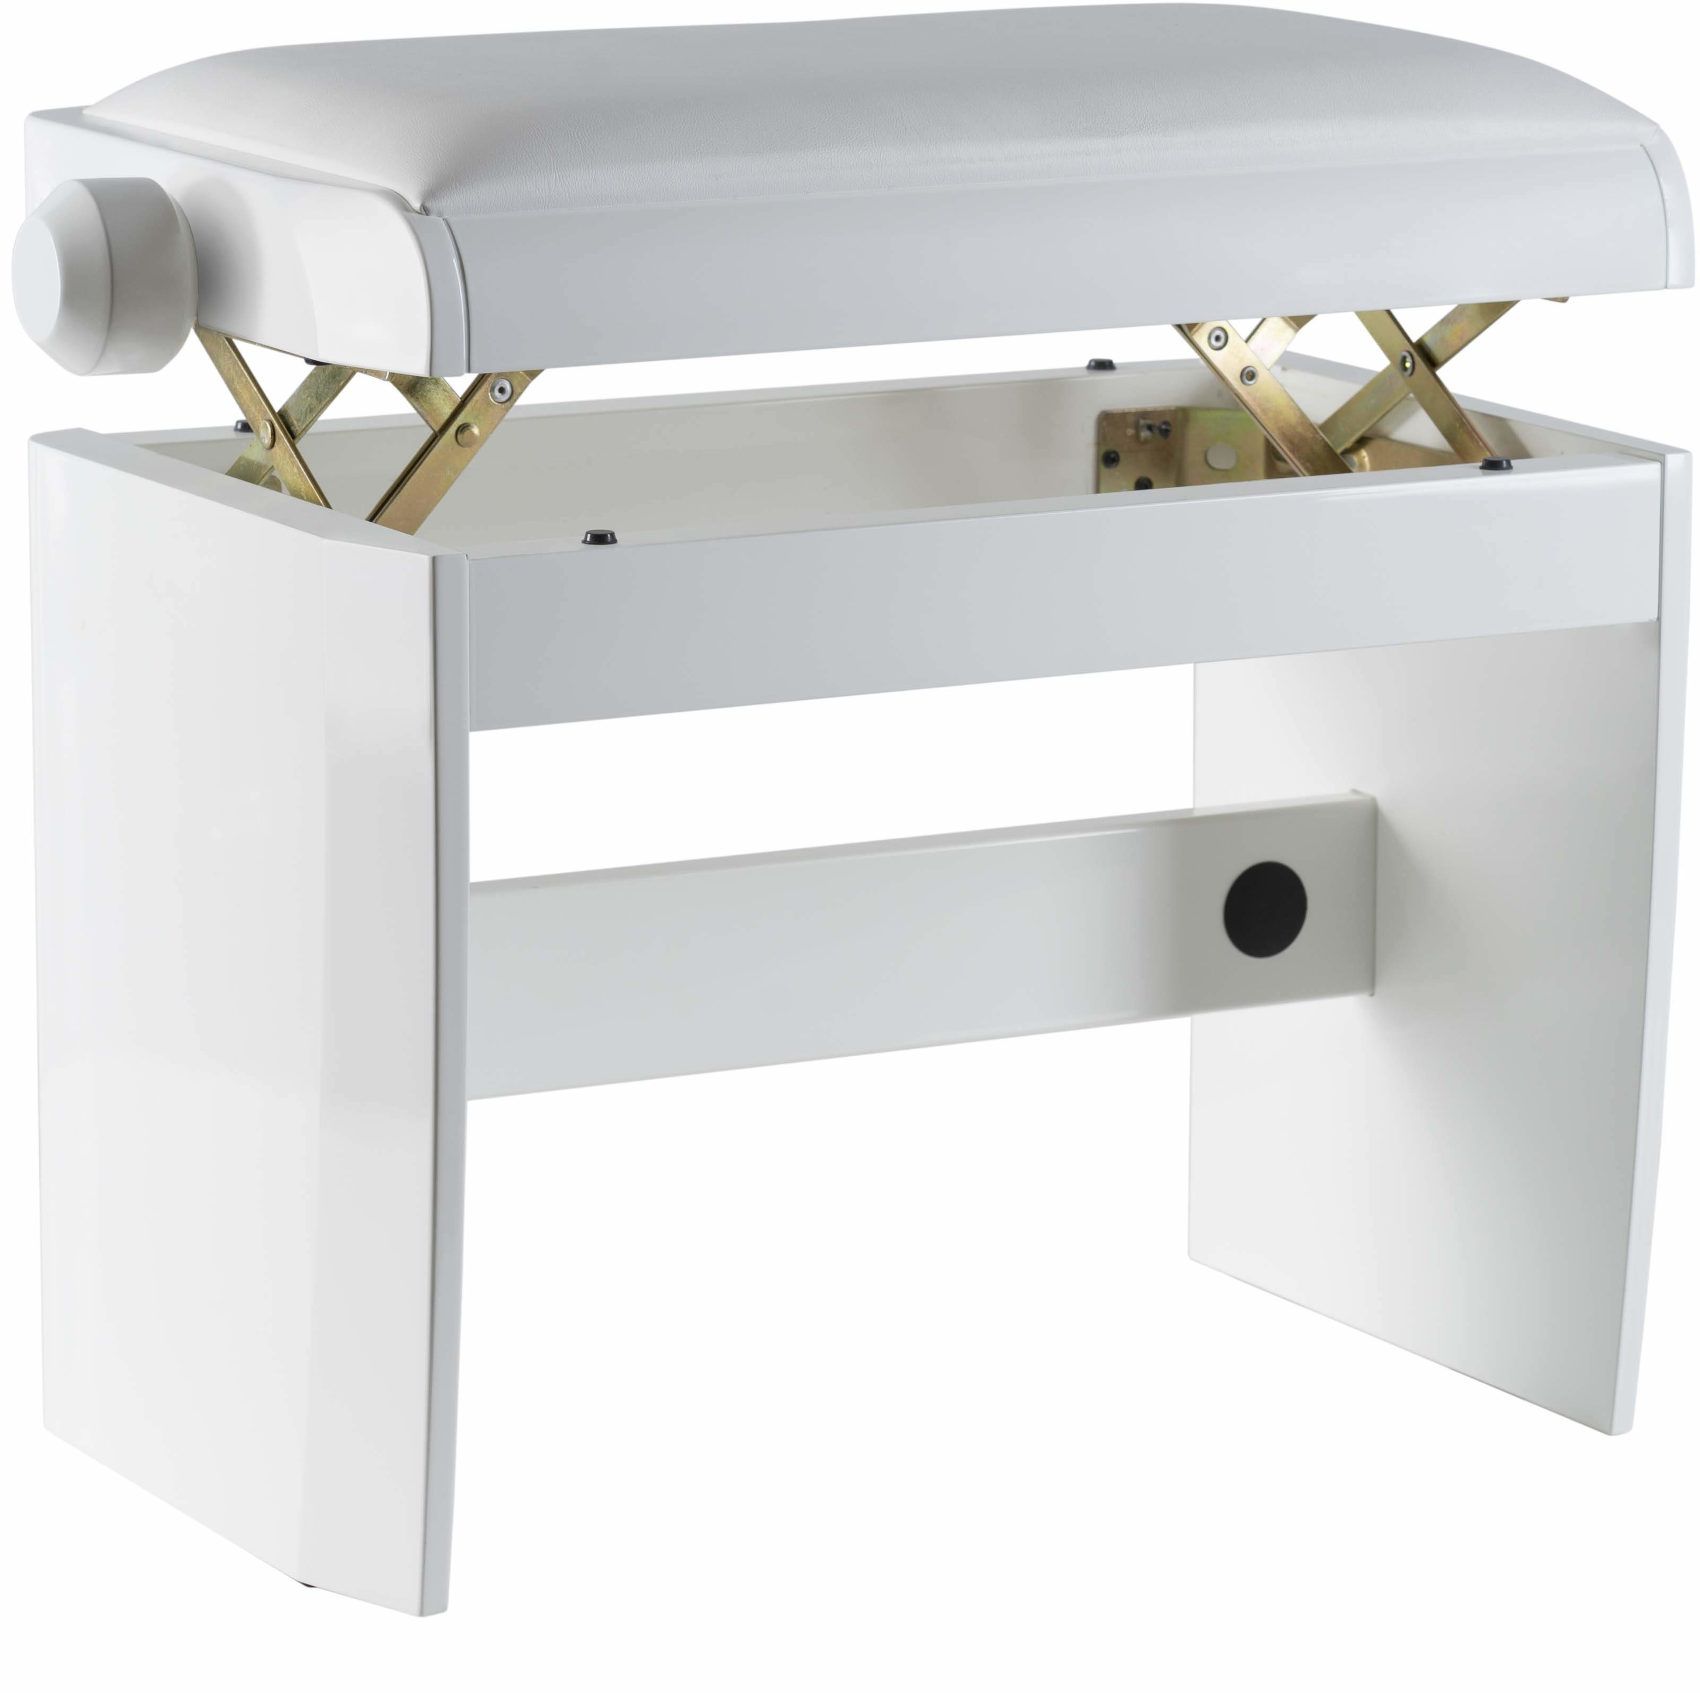 Dexibell Bench White Polished - фото 2